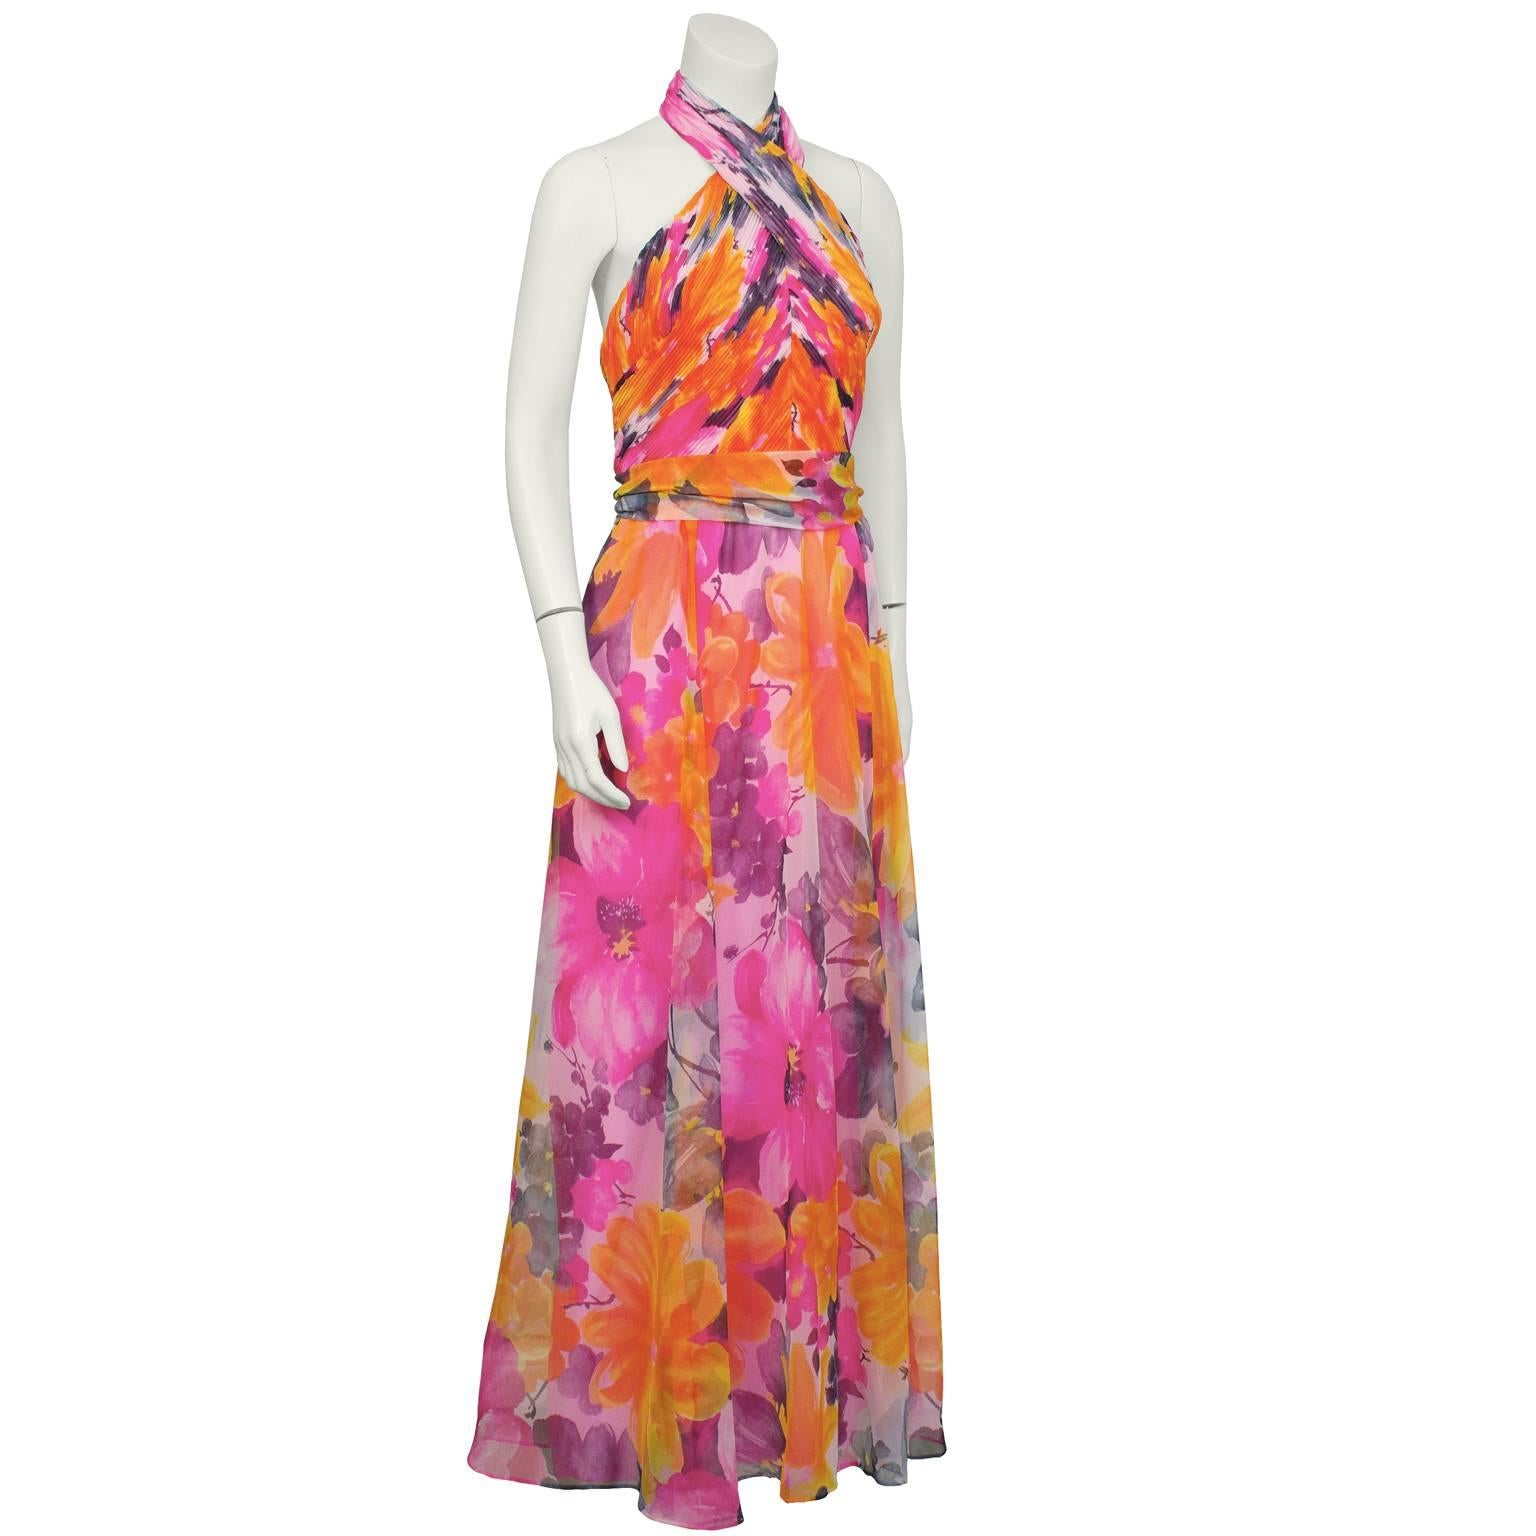 1970's fun and flirty polyester blend hot pink floral halter gown. The bodice is ruched and the skirt falls from the natural waist. Attached sash at the waist, zips up the back with hooks at the neck. Fully lined in hot pink silk blend material. In